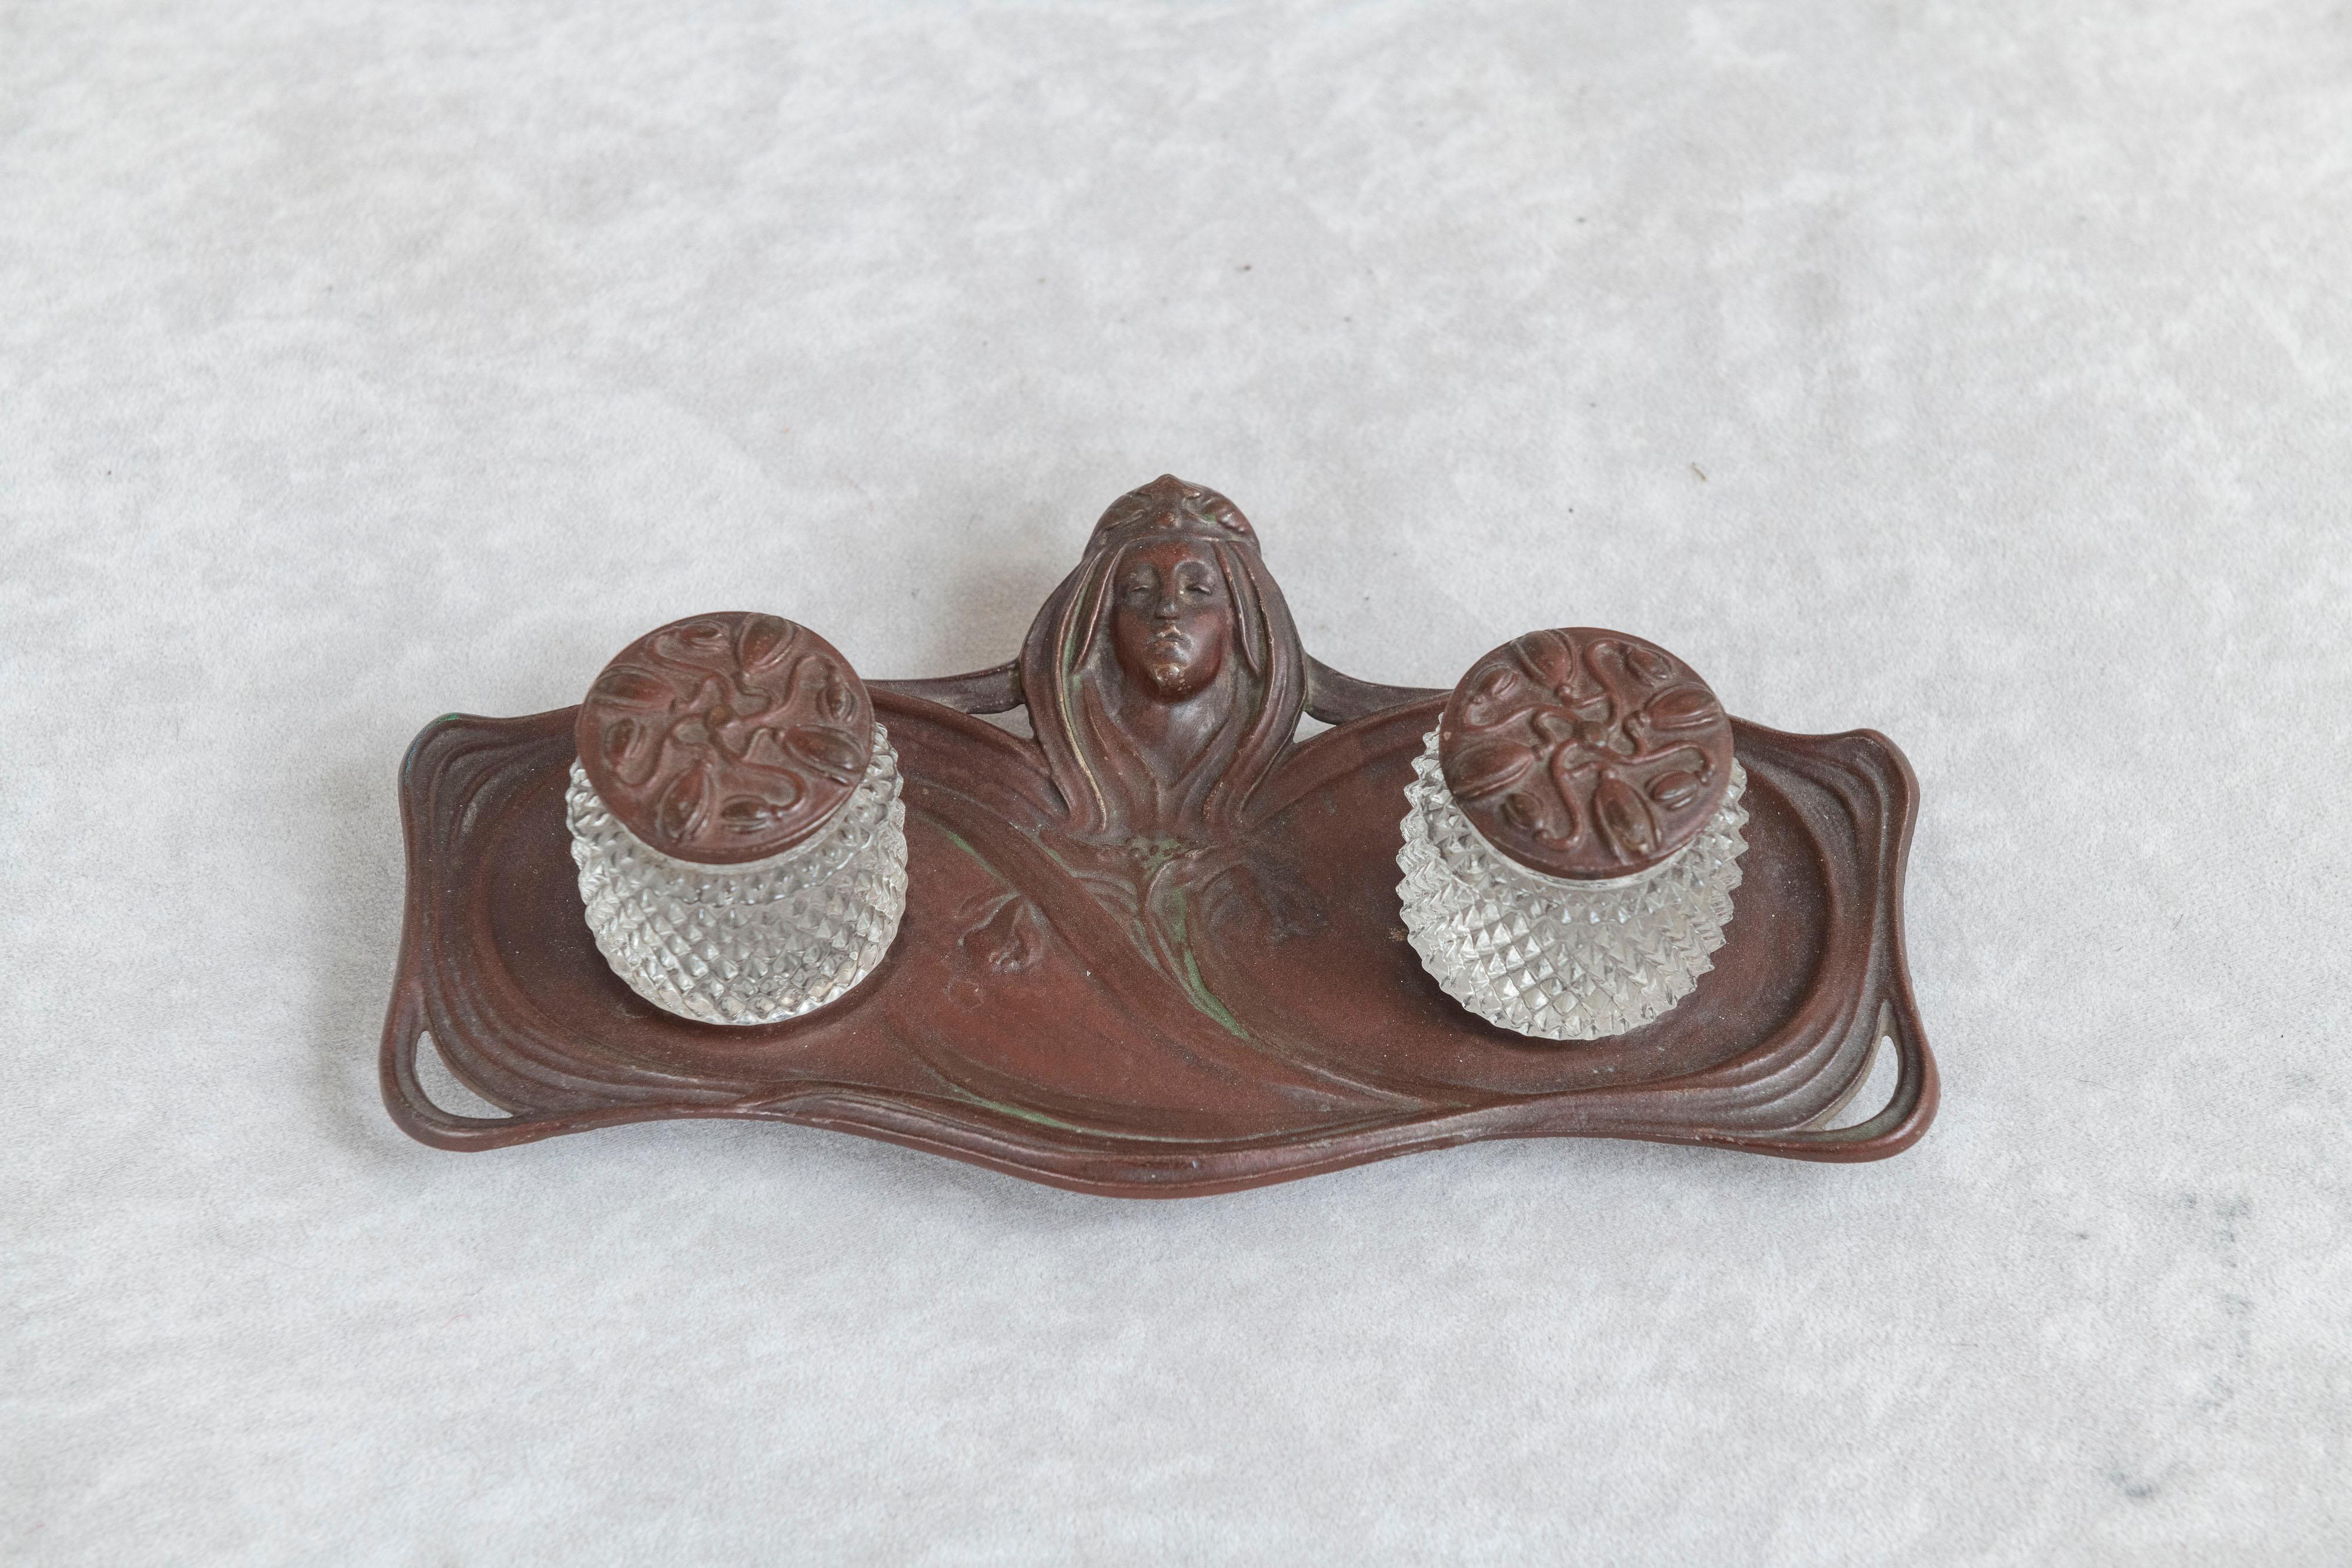 This beautiful little inkwell has a strong commitment to the art nouveau movement. From the cameo of a woman with flowing hair to the finely detailed inkwell lids depicting swirling flowers. We find it amazing that both inkwells are still there with